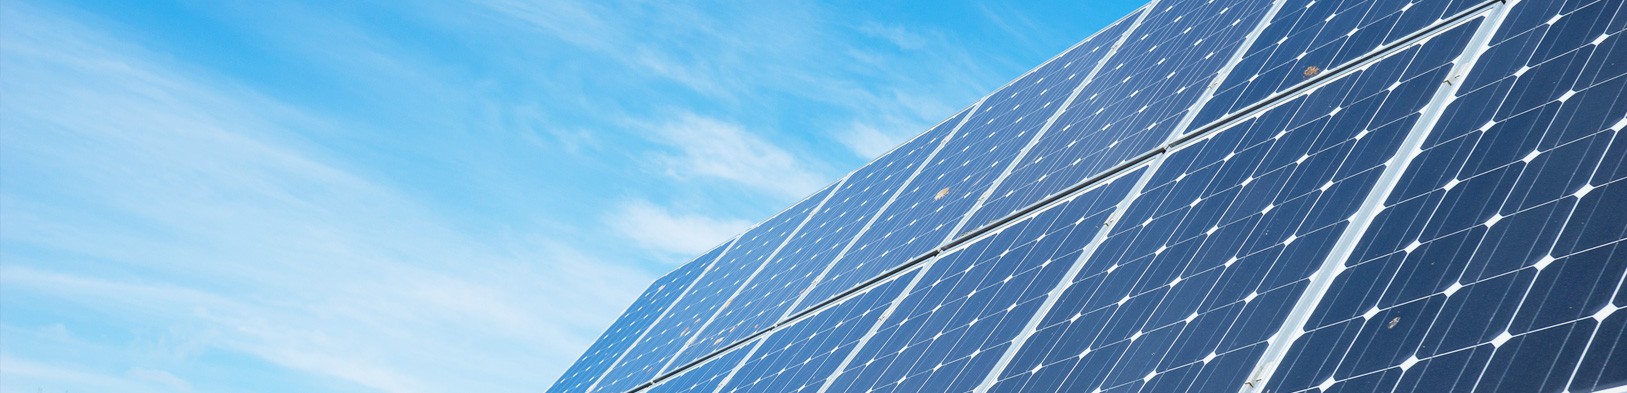 The Renewable Energy Methods: Use of Solar Energy as a way to reduce Environmental Damage